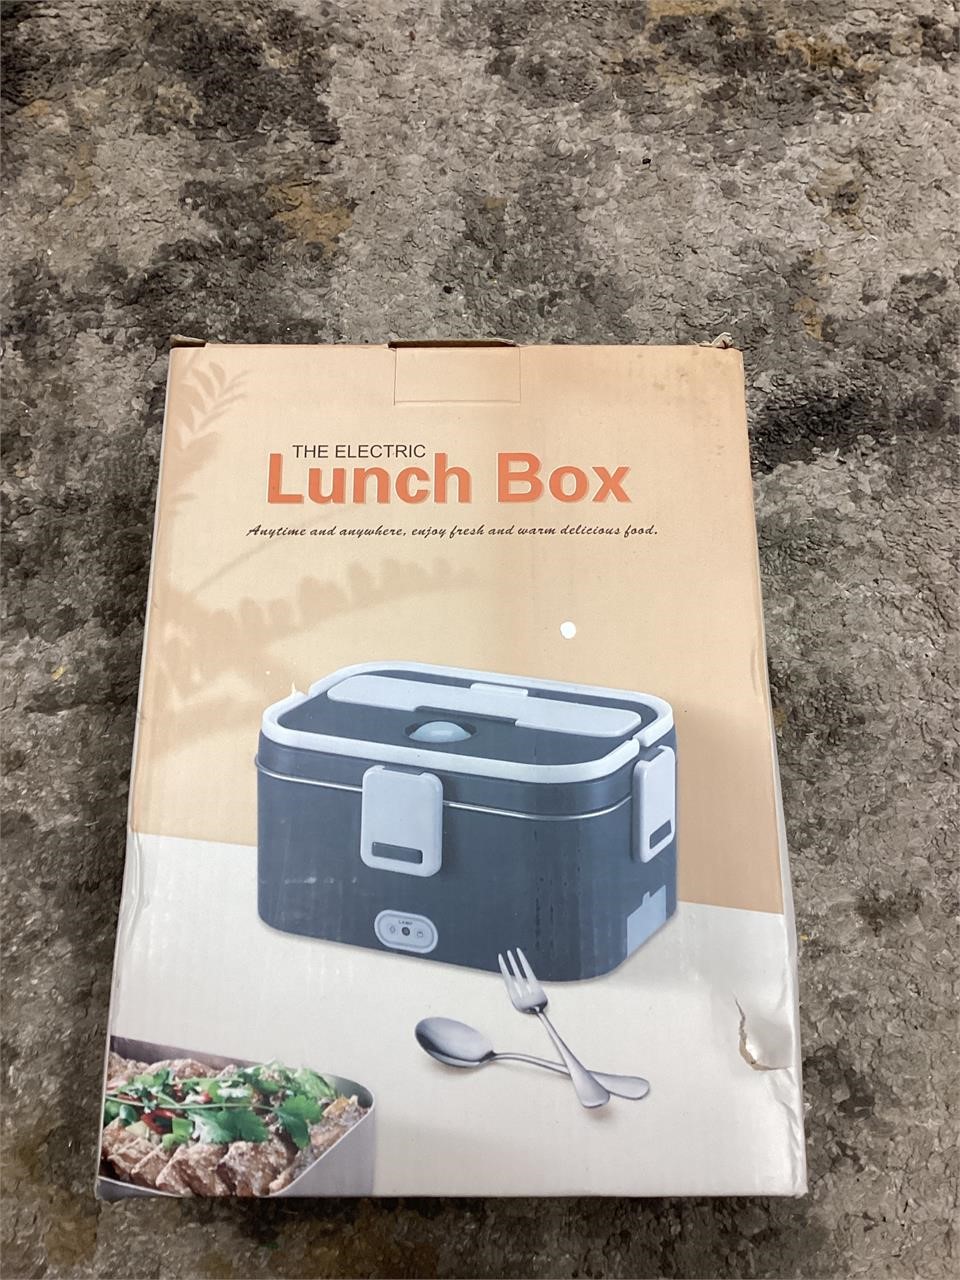 The electric lunchbox